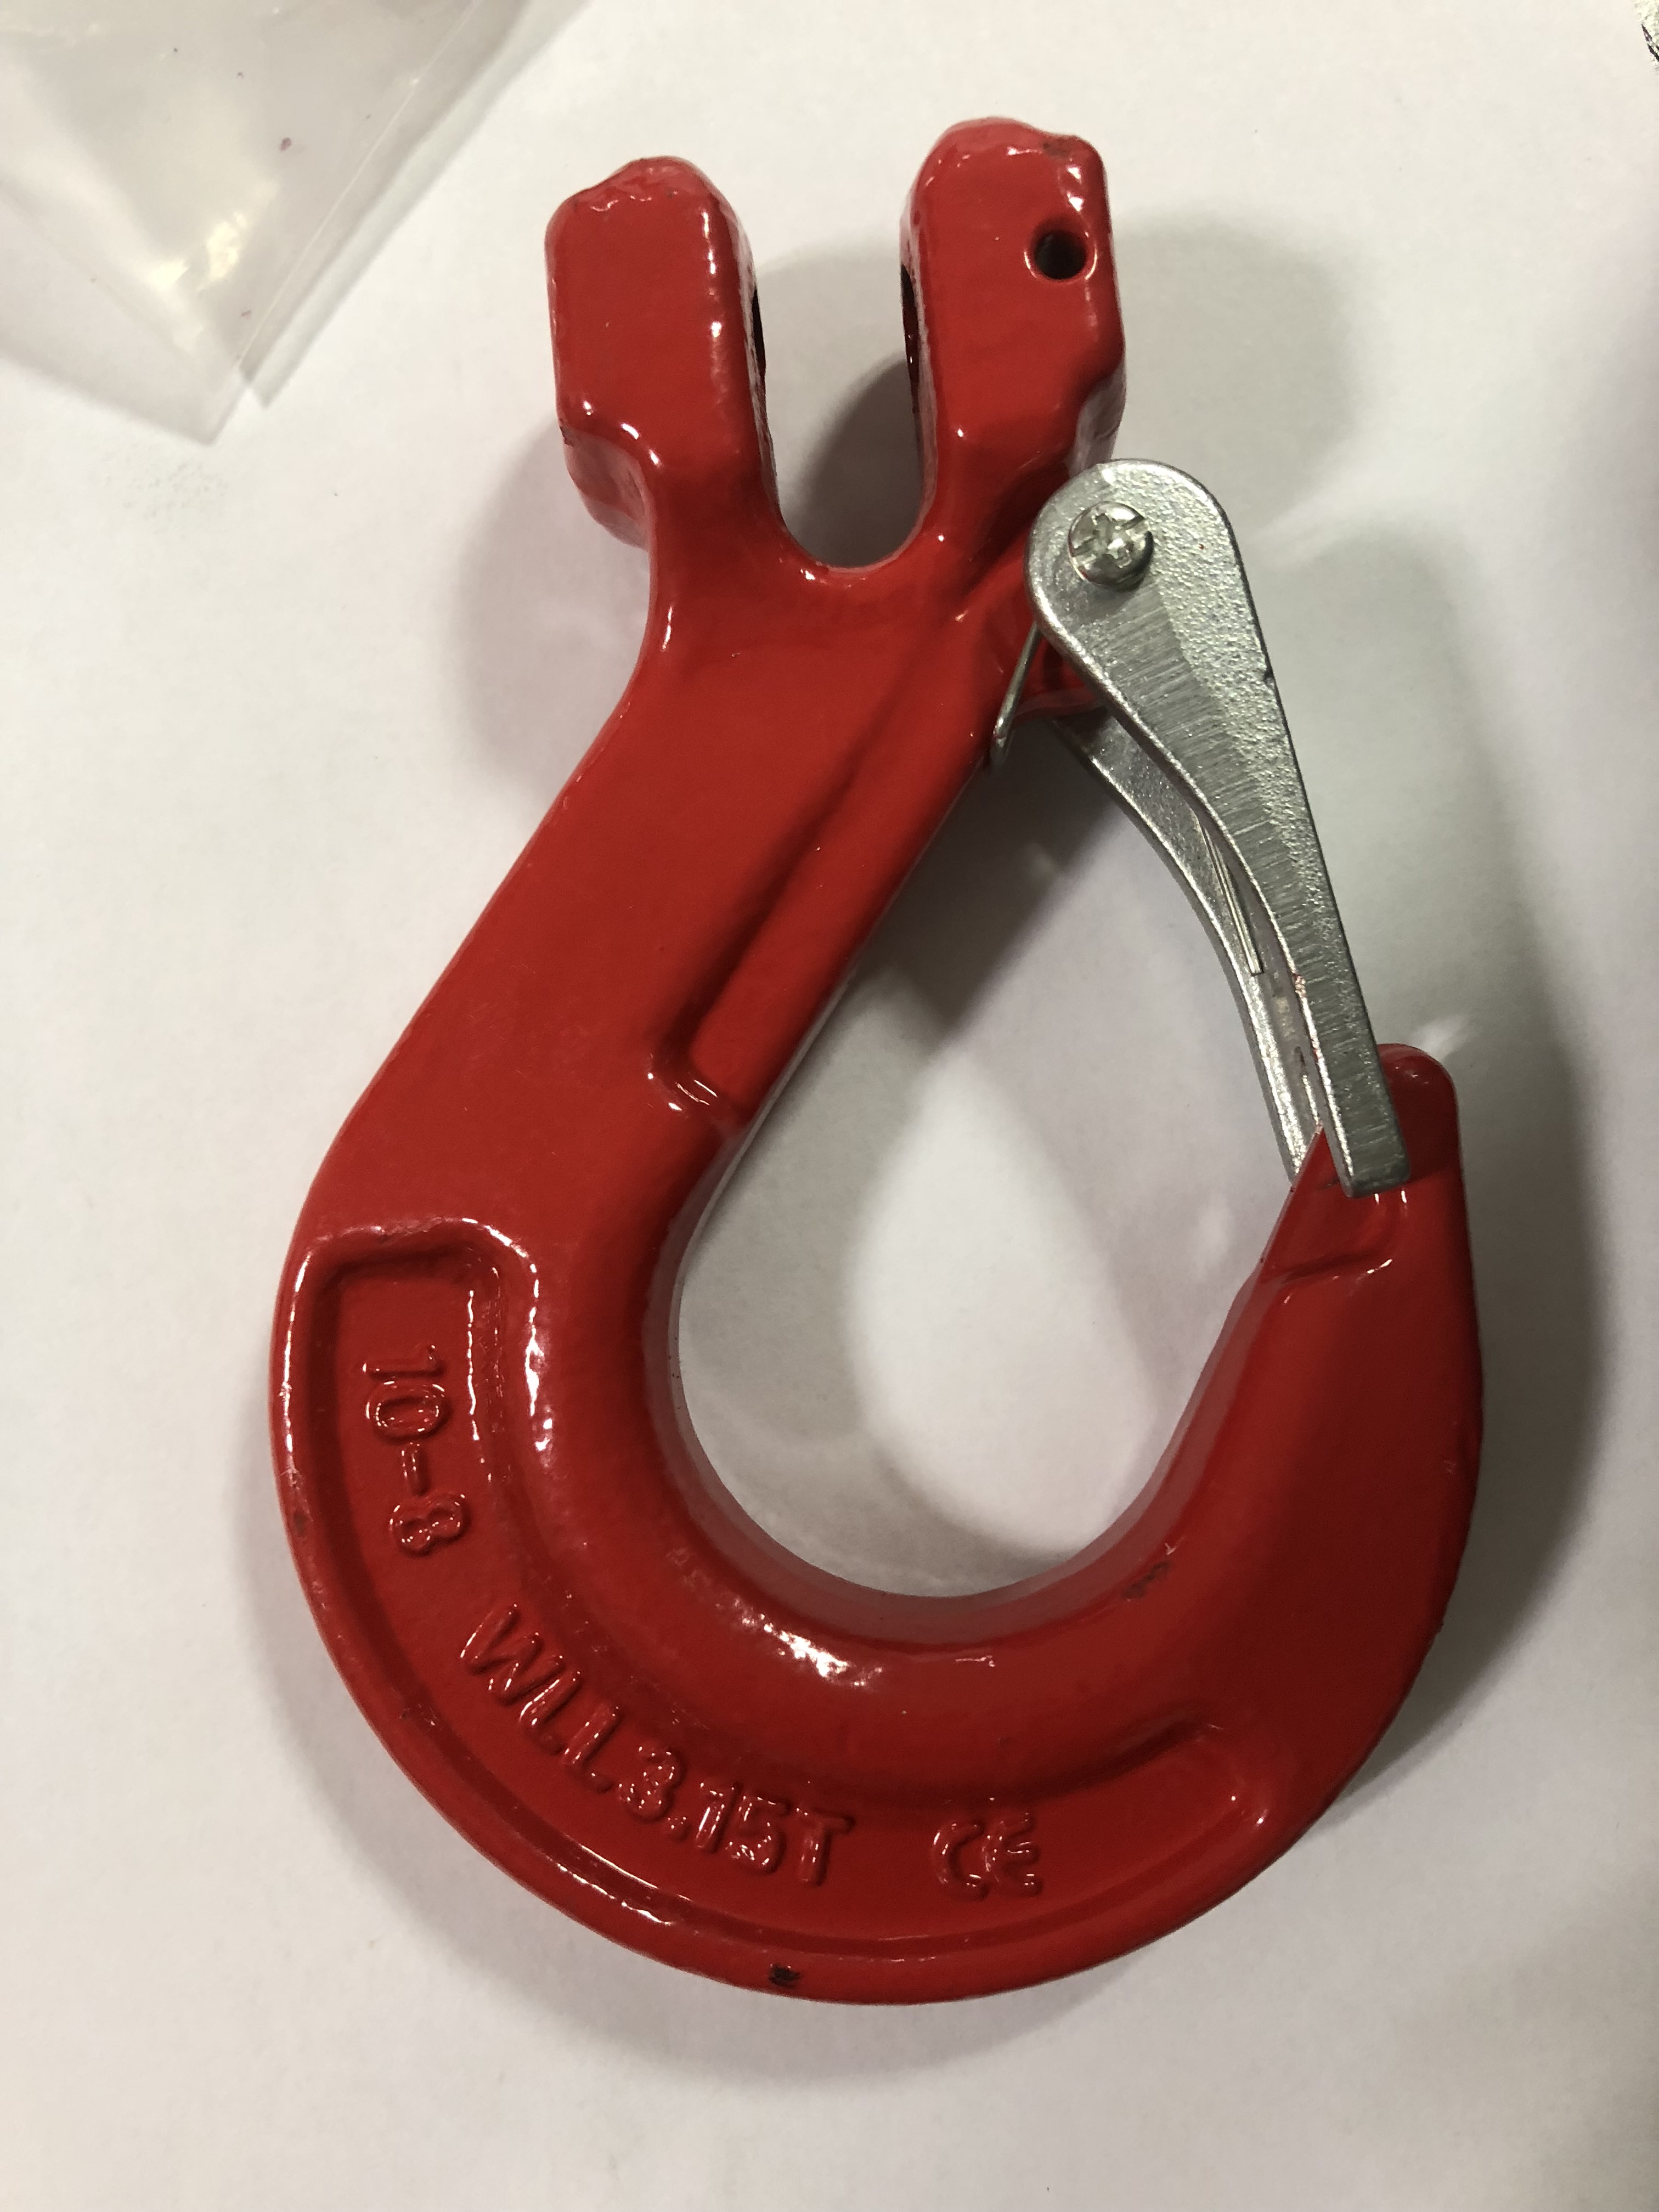 Heavy Duty Alloy Steel G80 Clevis Sling Hook With Safety Latch